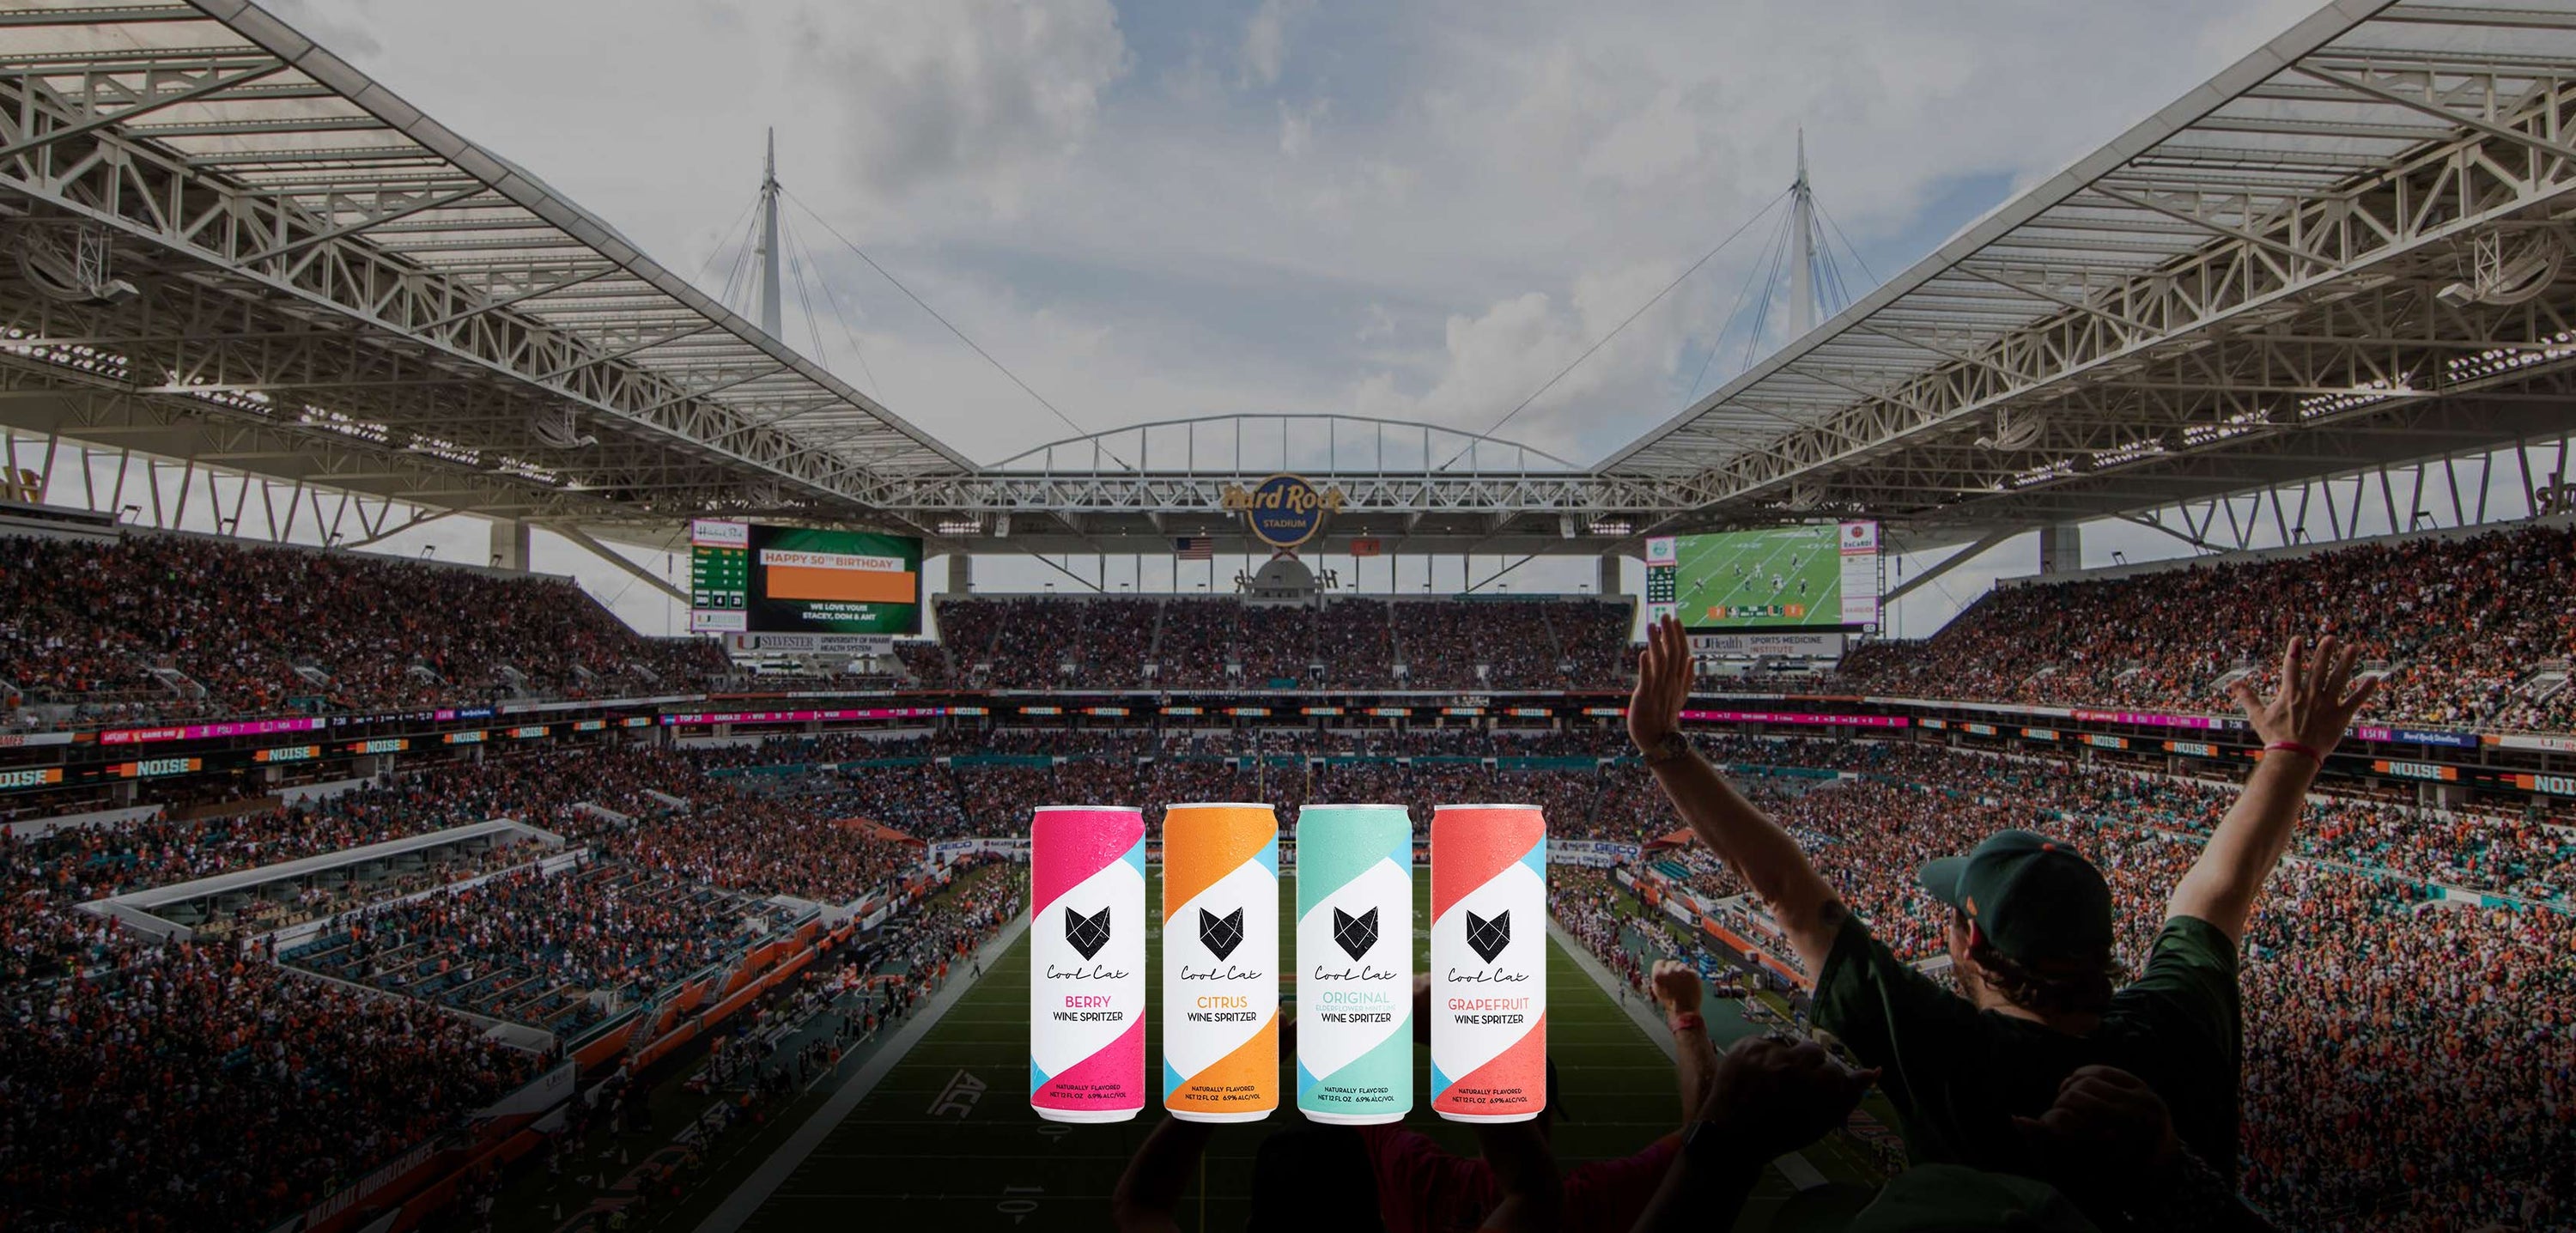 The four flavors of Cool Cat canned wine seltzer in front of the Miami Hurricanes football field.